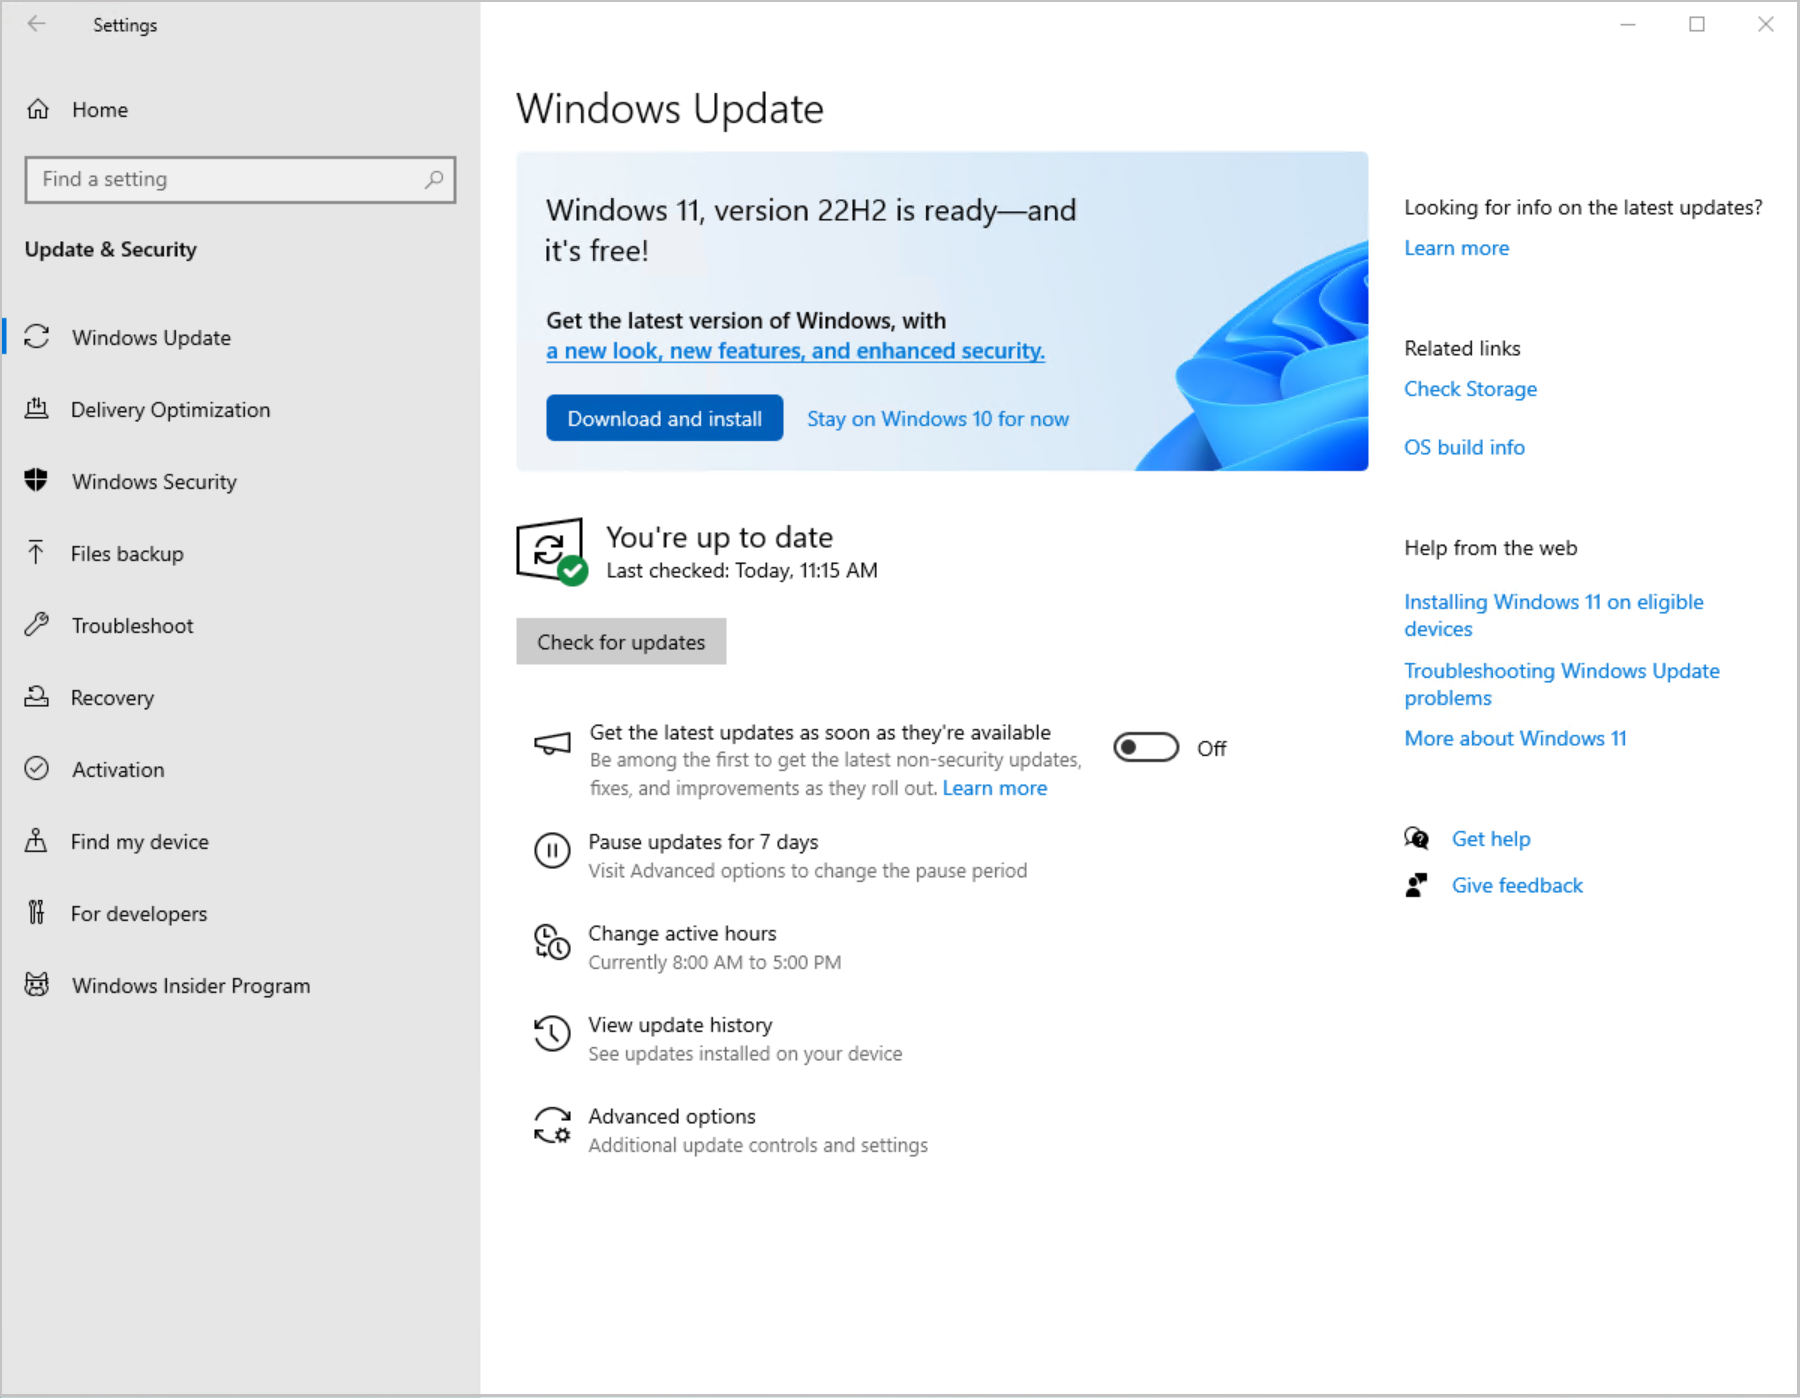 Screenshot of the Windows Update page in Settings showing that Windows 11 is ready to be downloaded and installed.